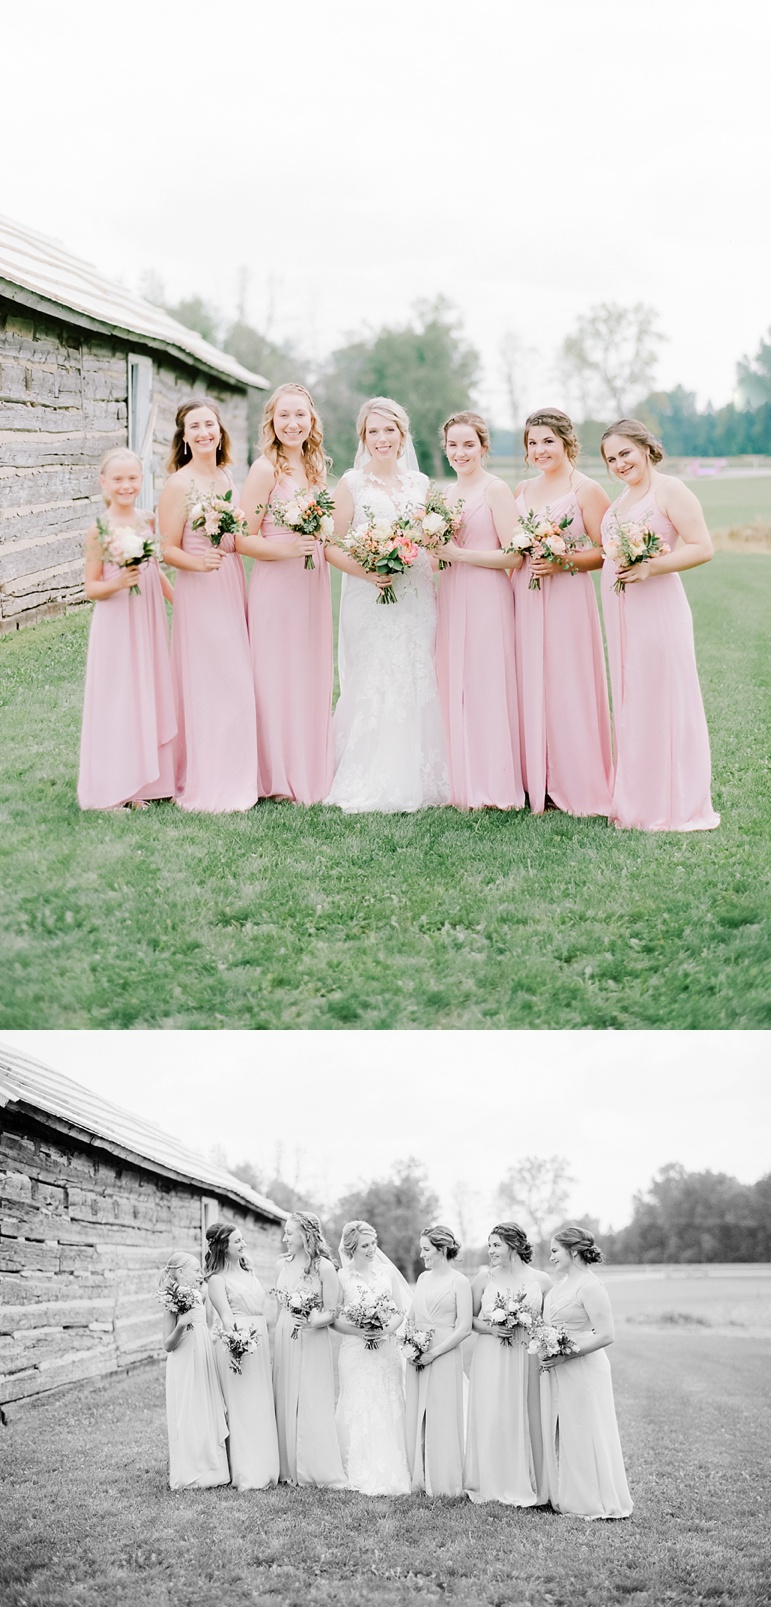 Town of Chase Stone Barn Green Bay WI Wedding